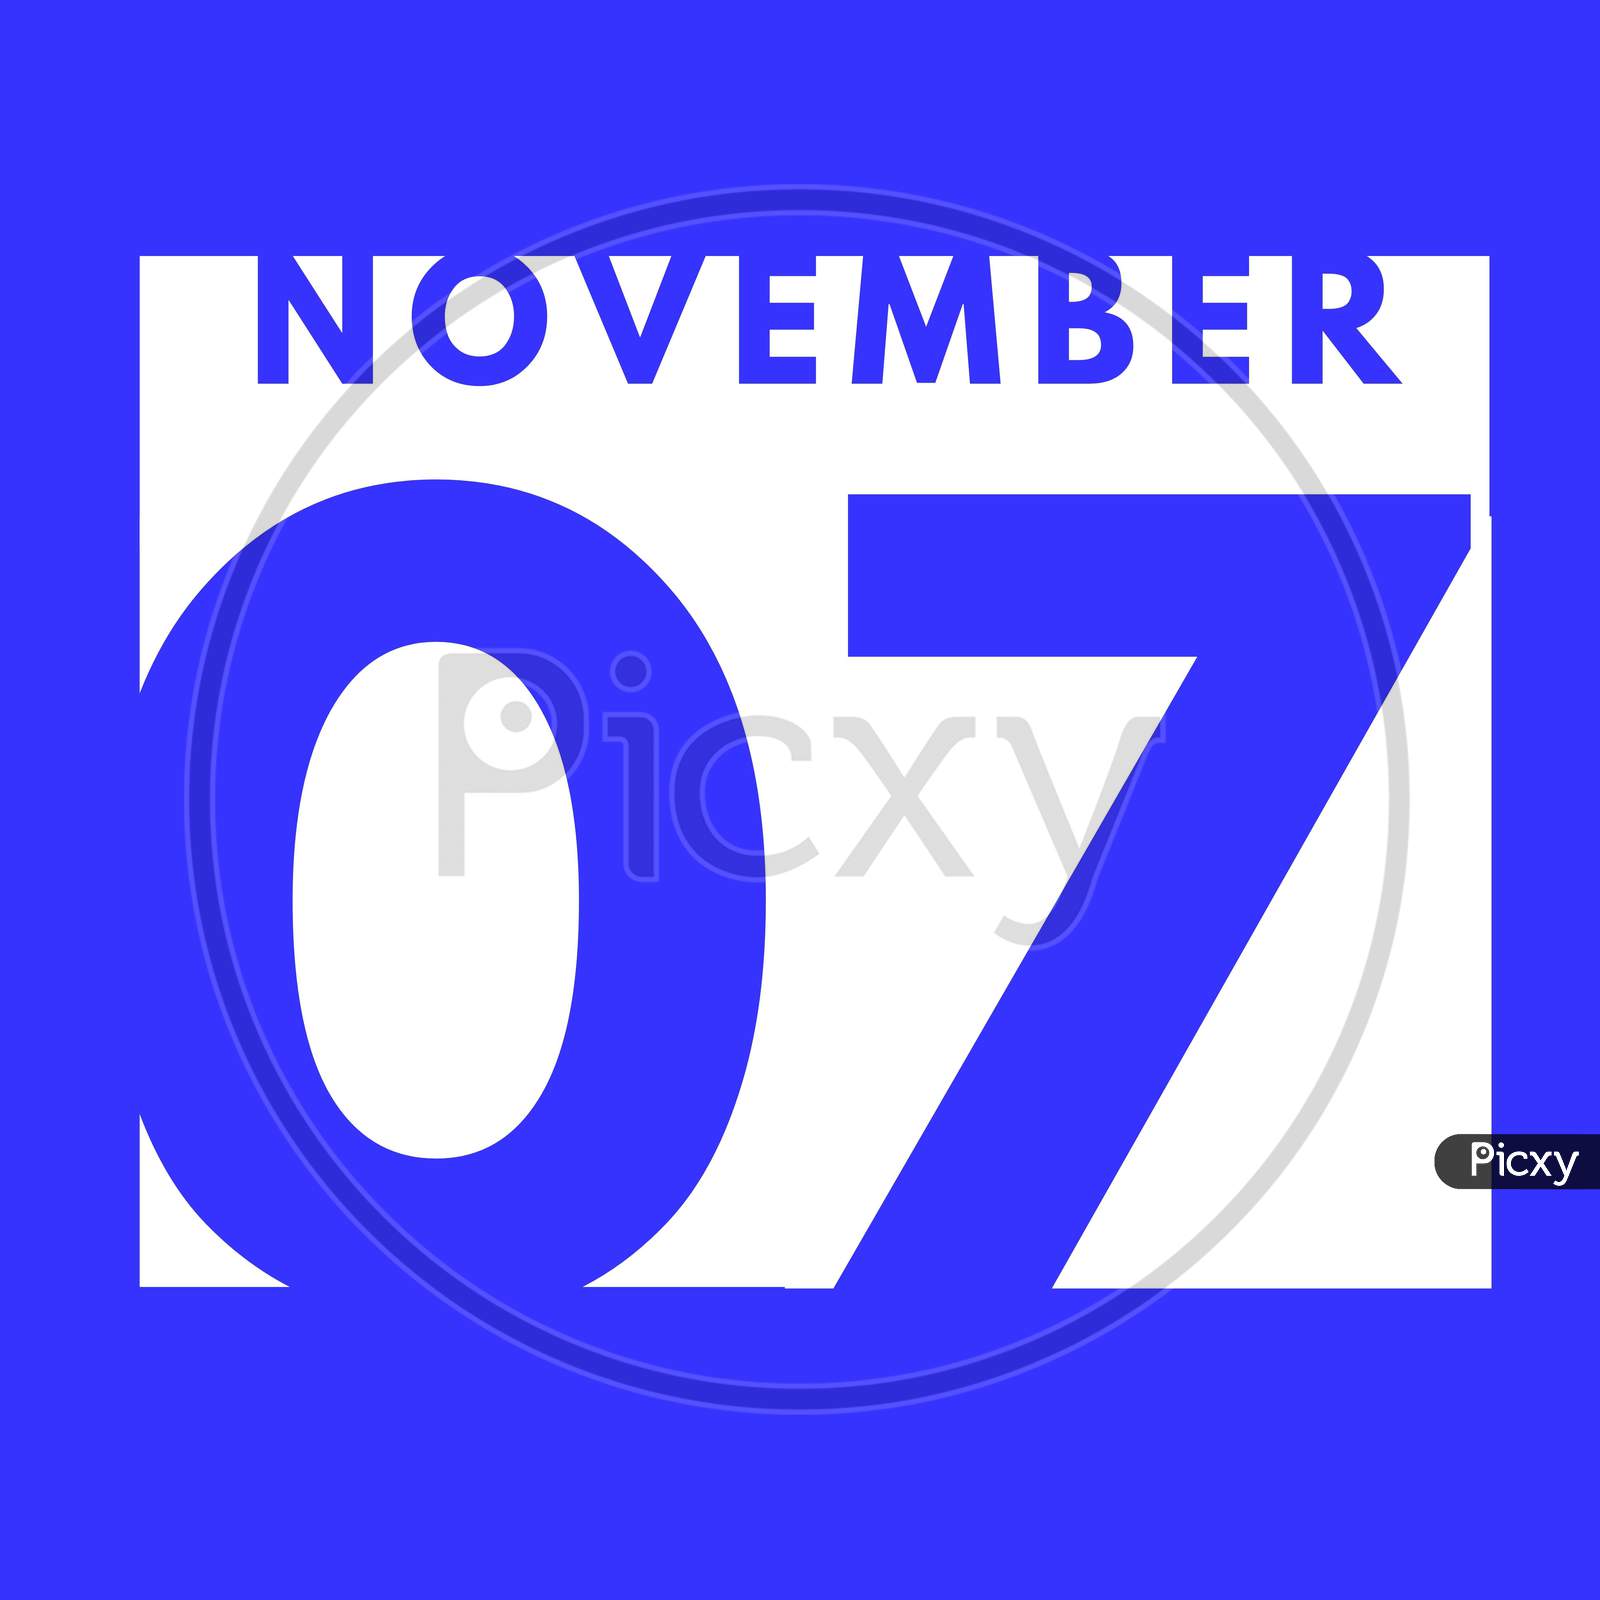 November 7 . Flat Modern Daily Calendar Icon .Date ,Day, Month .Calendar For The Month Of November